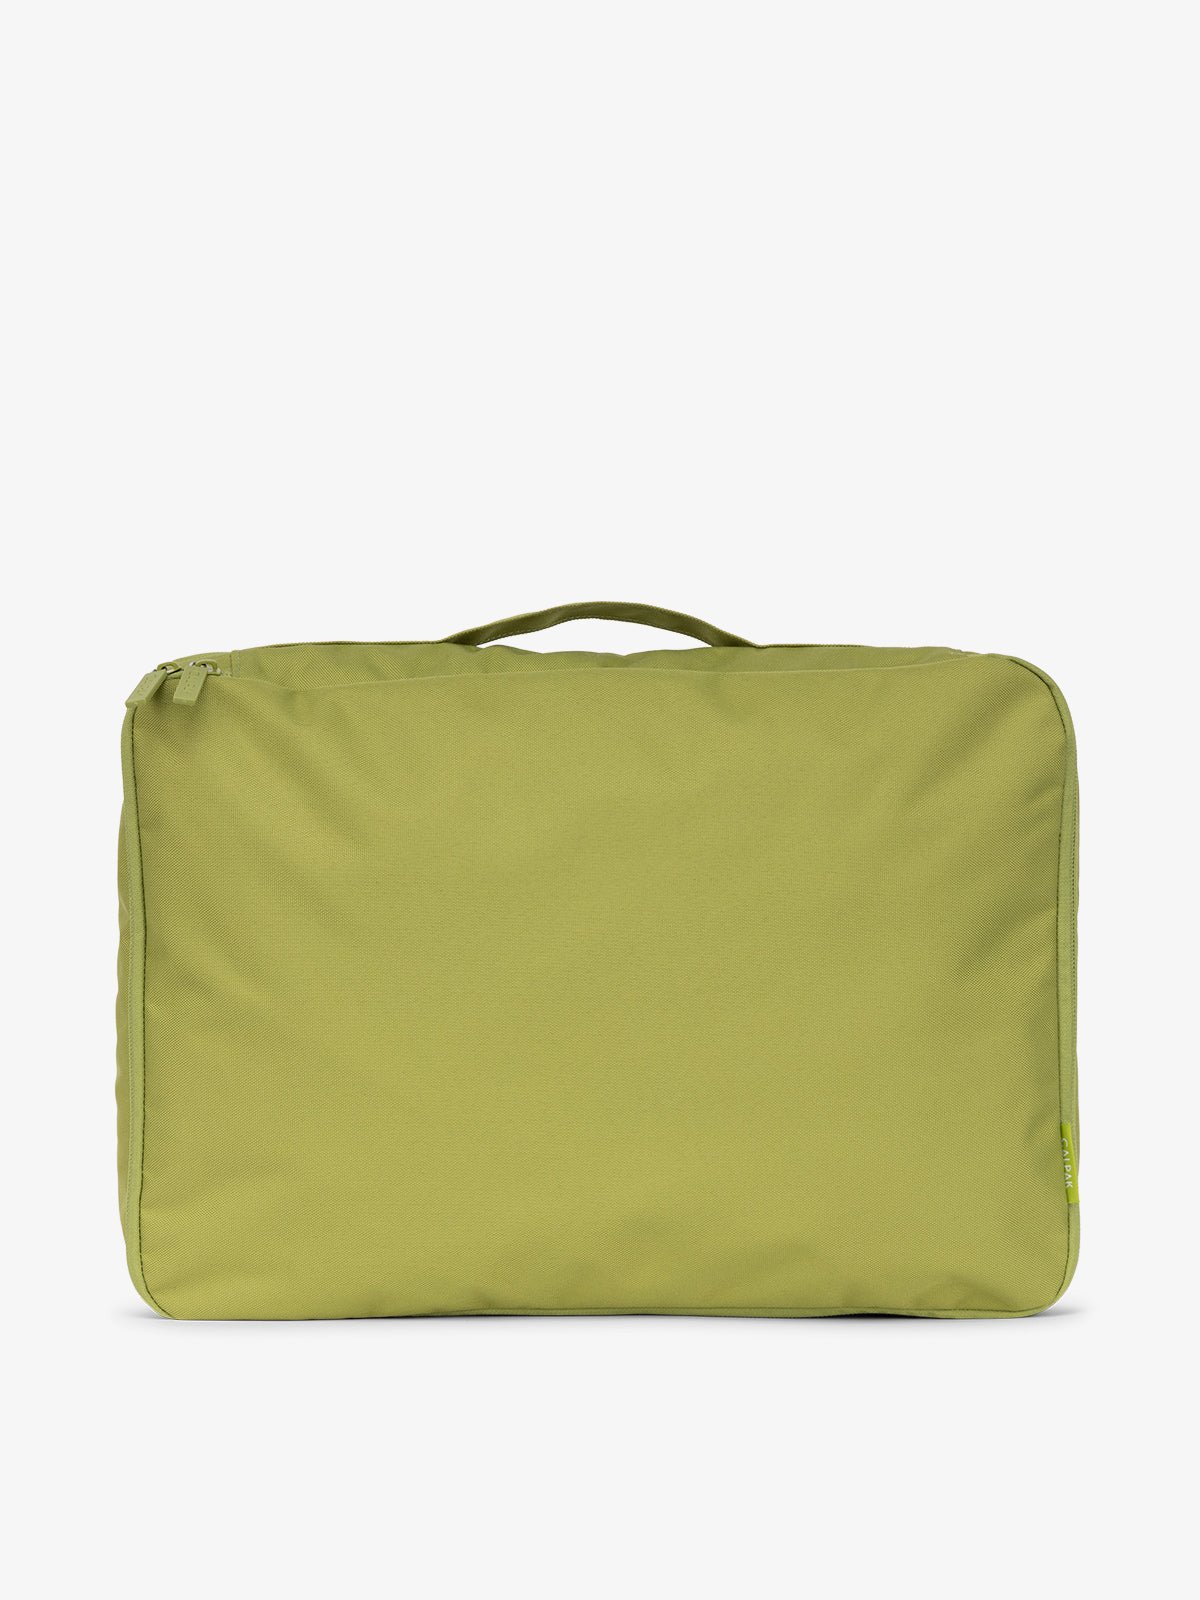 CALPAK large packing cubes with top handle in green